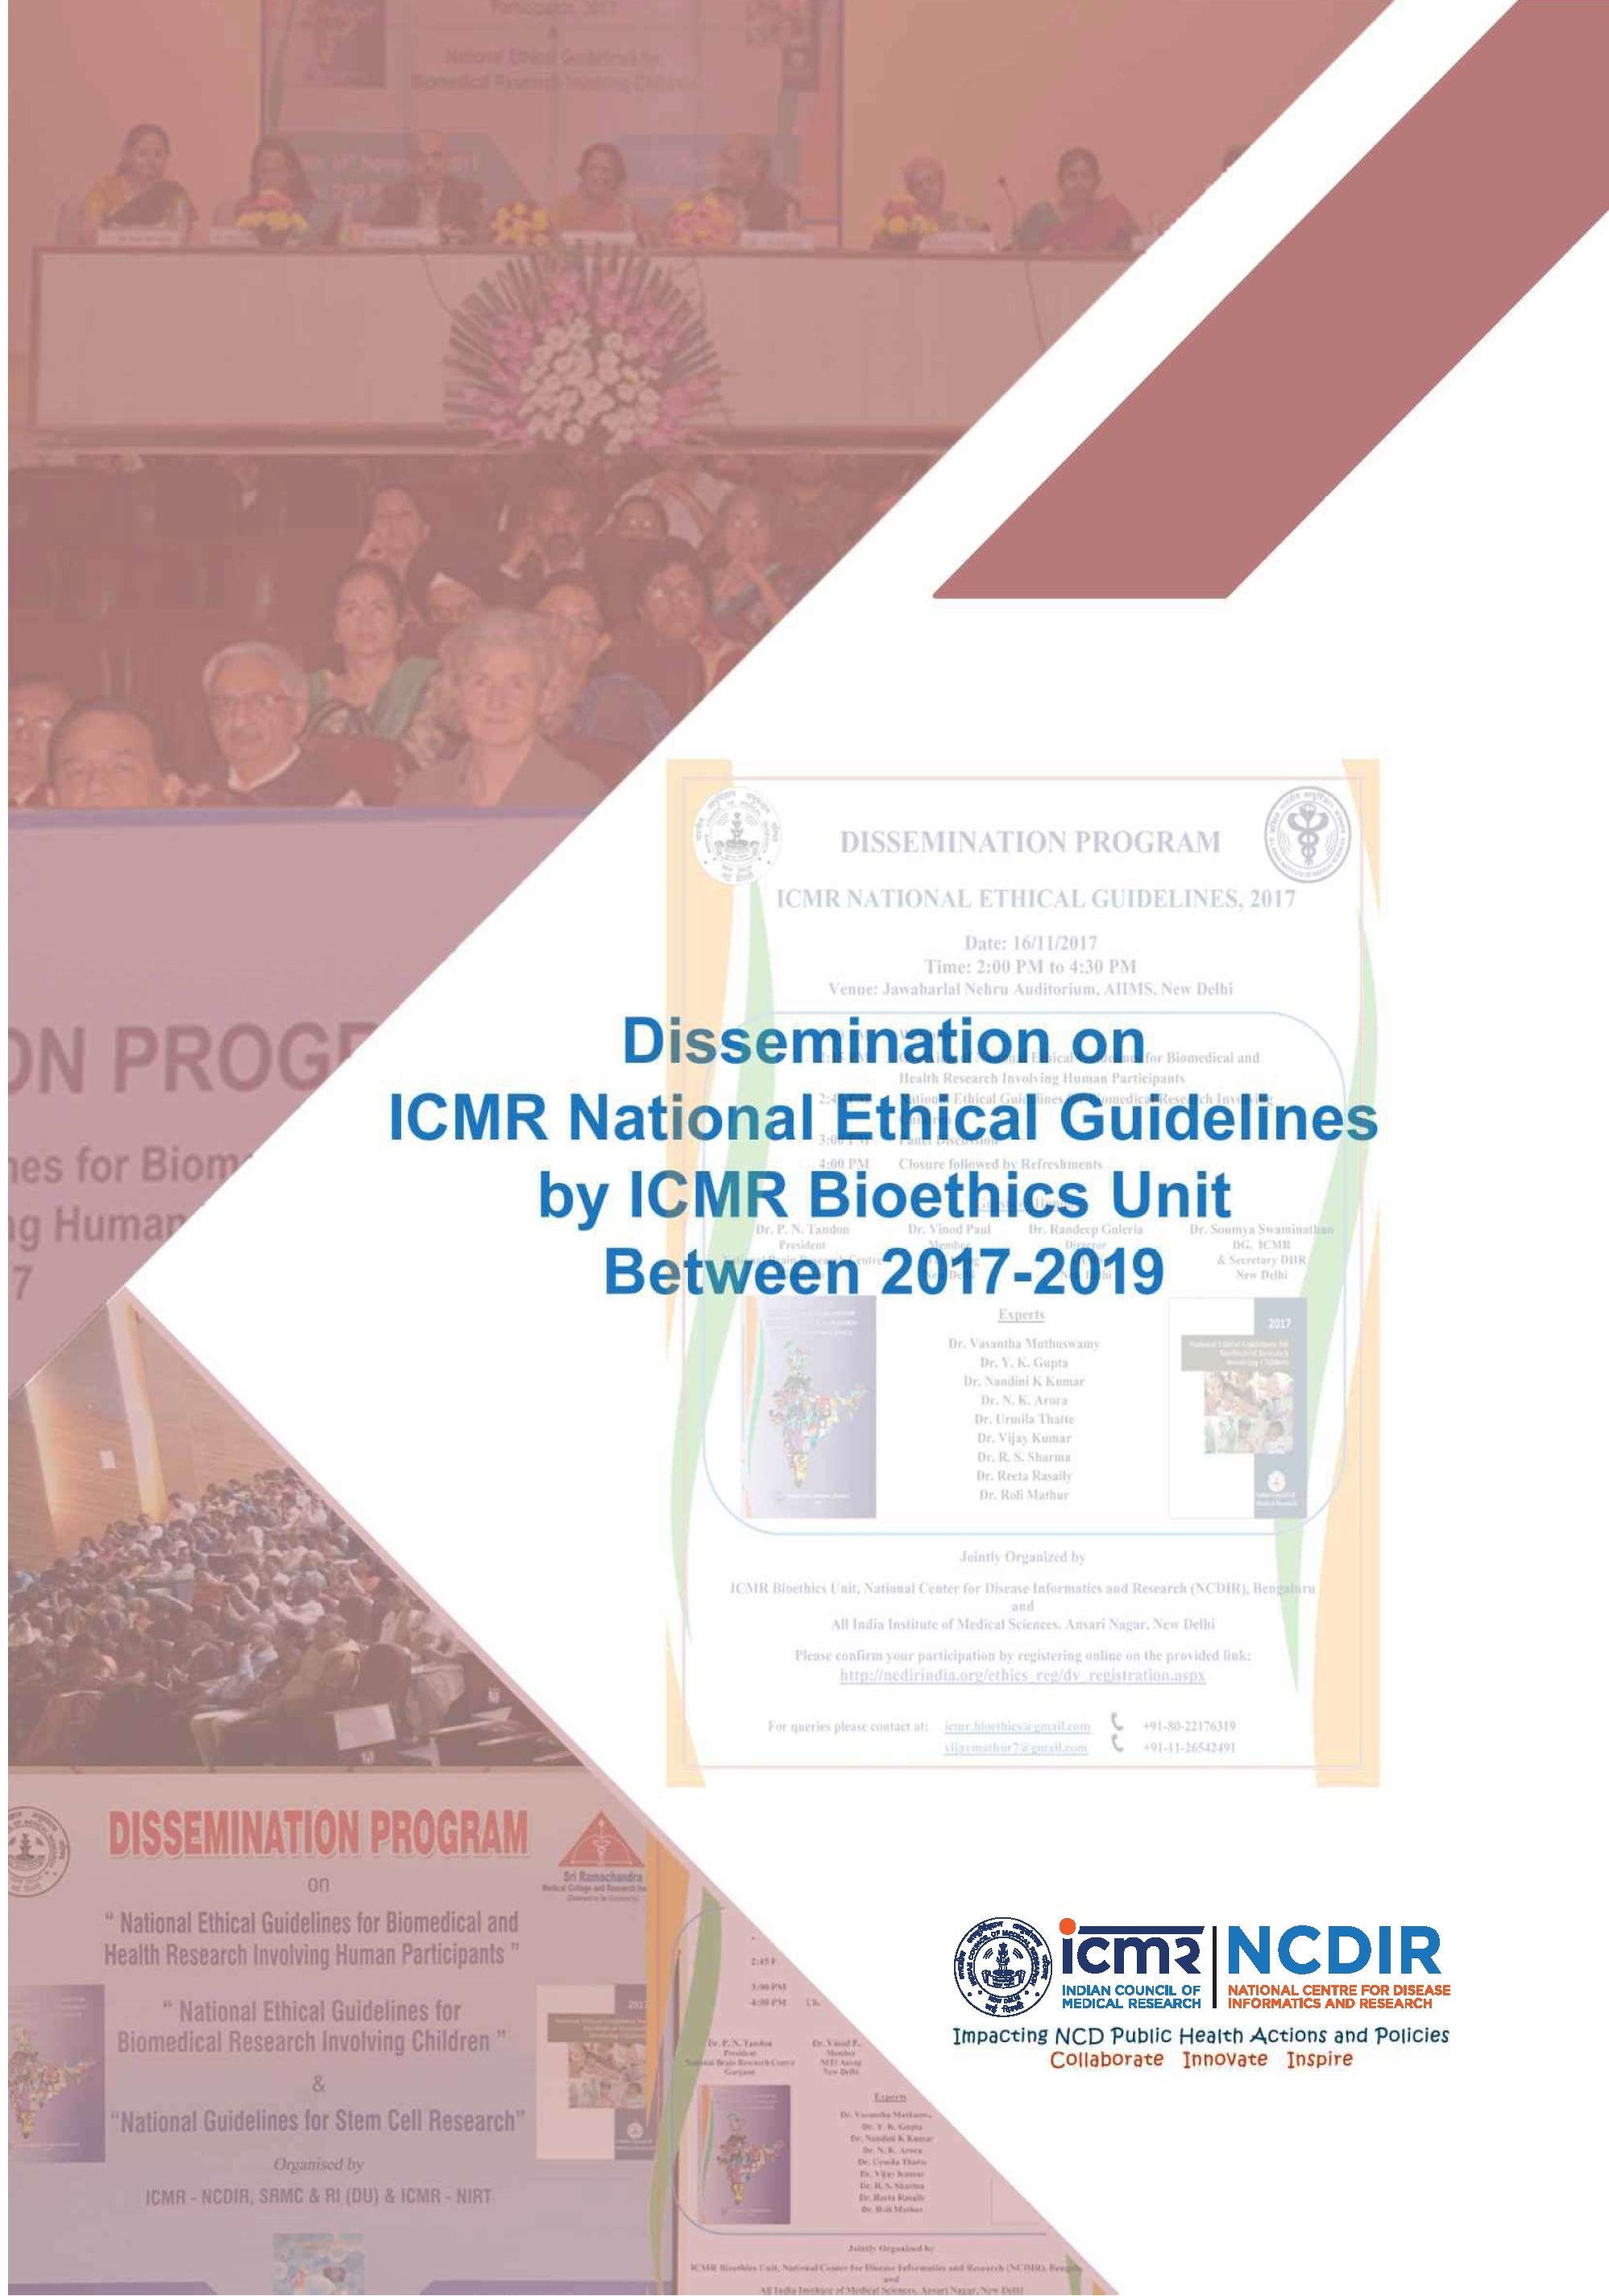 Dissemination Report on ICMR National Ethical Guidelines by ICMR Bioethics Unit,2020